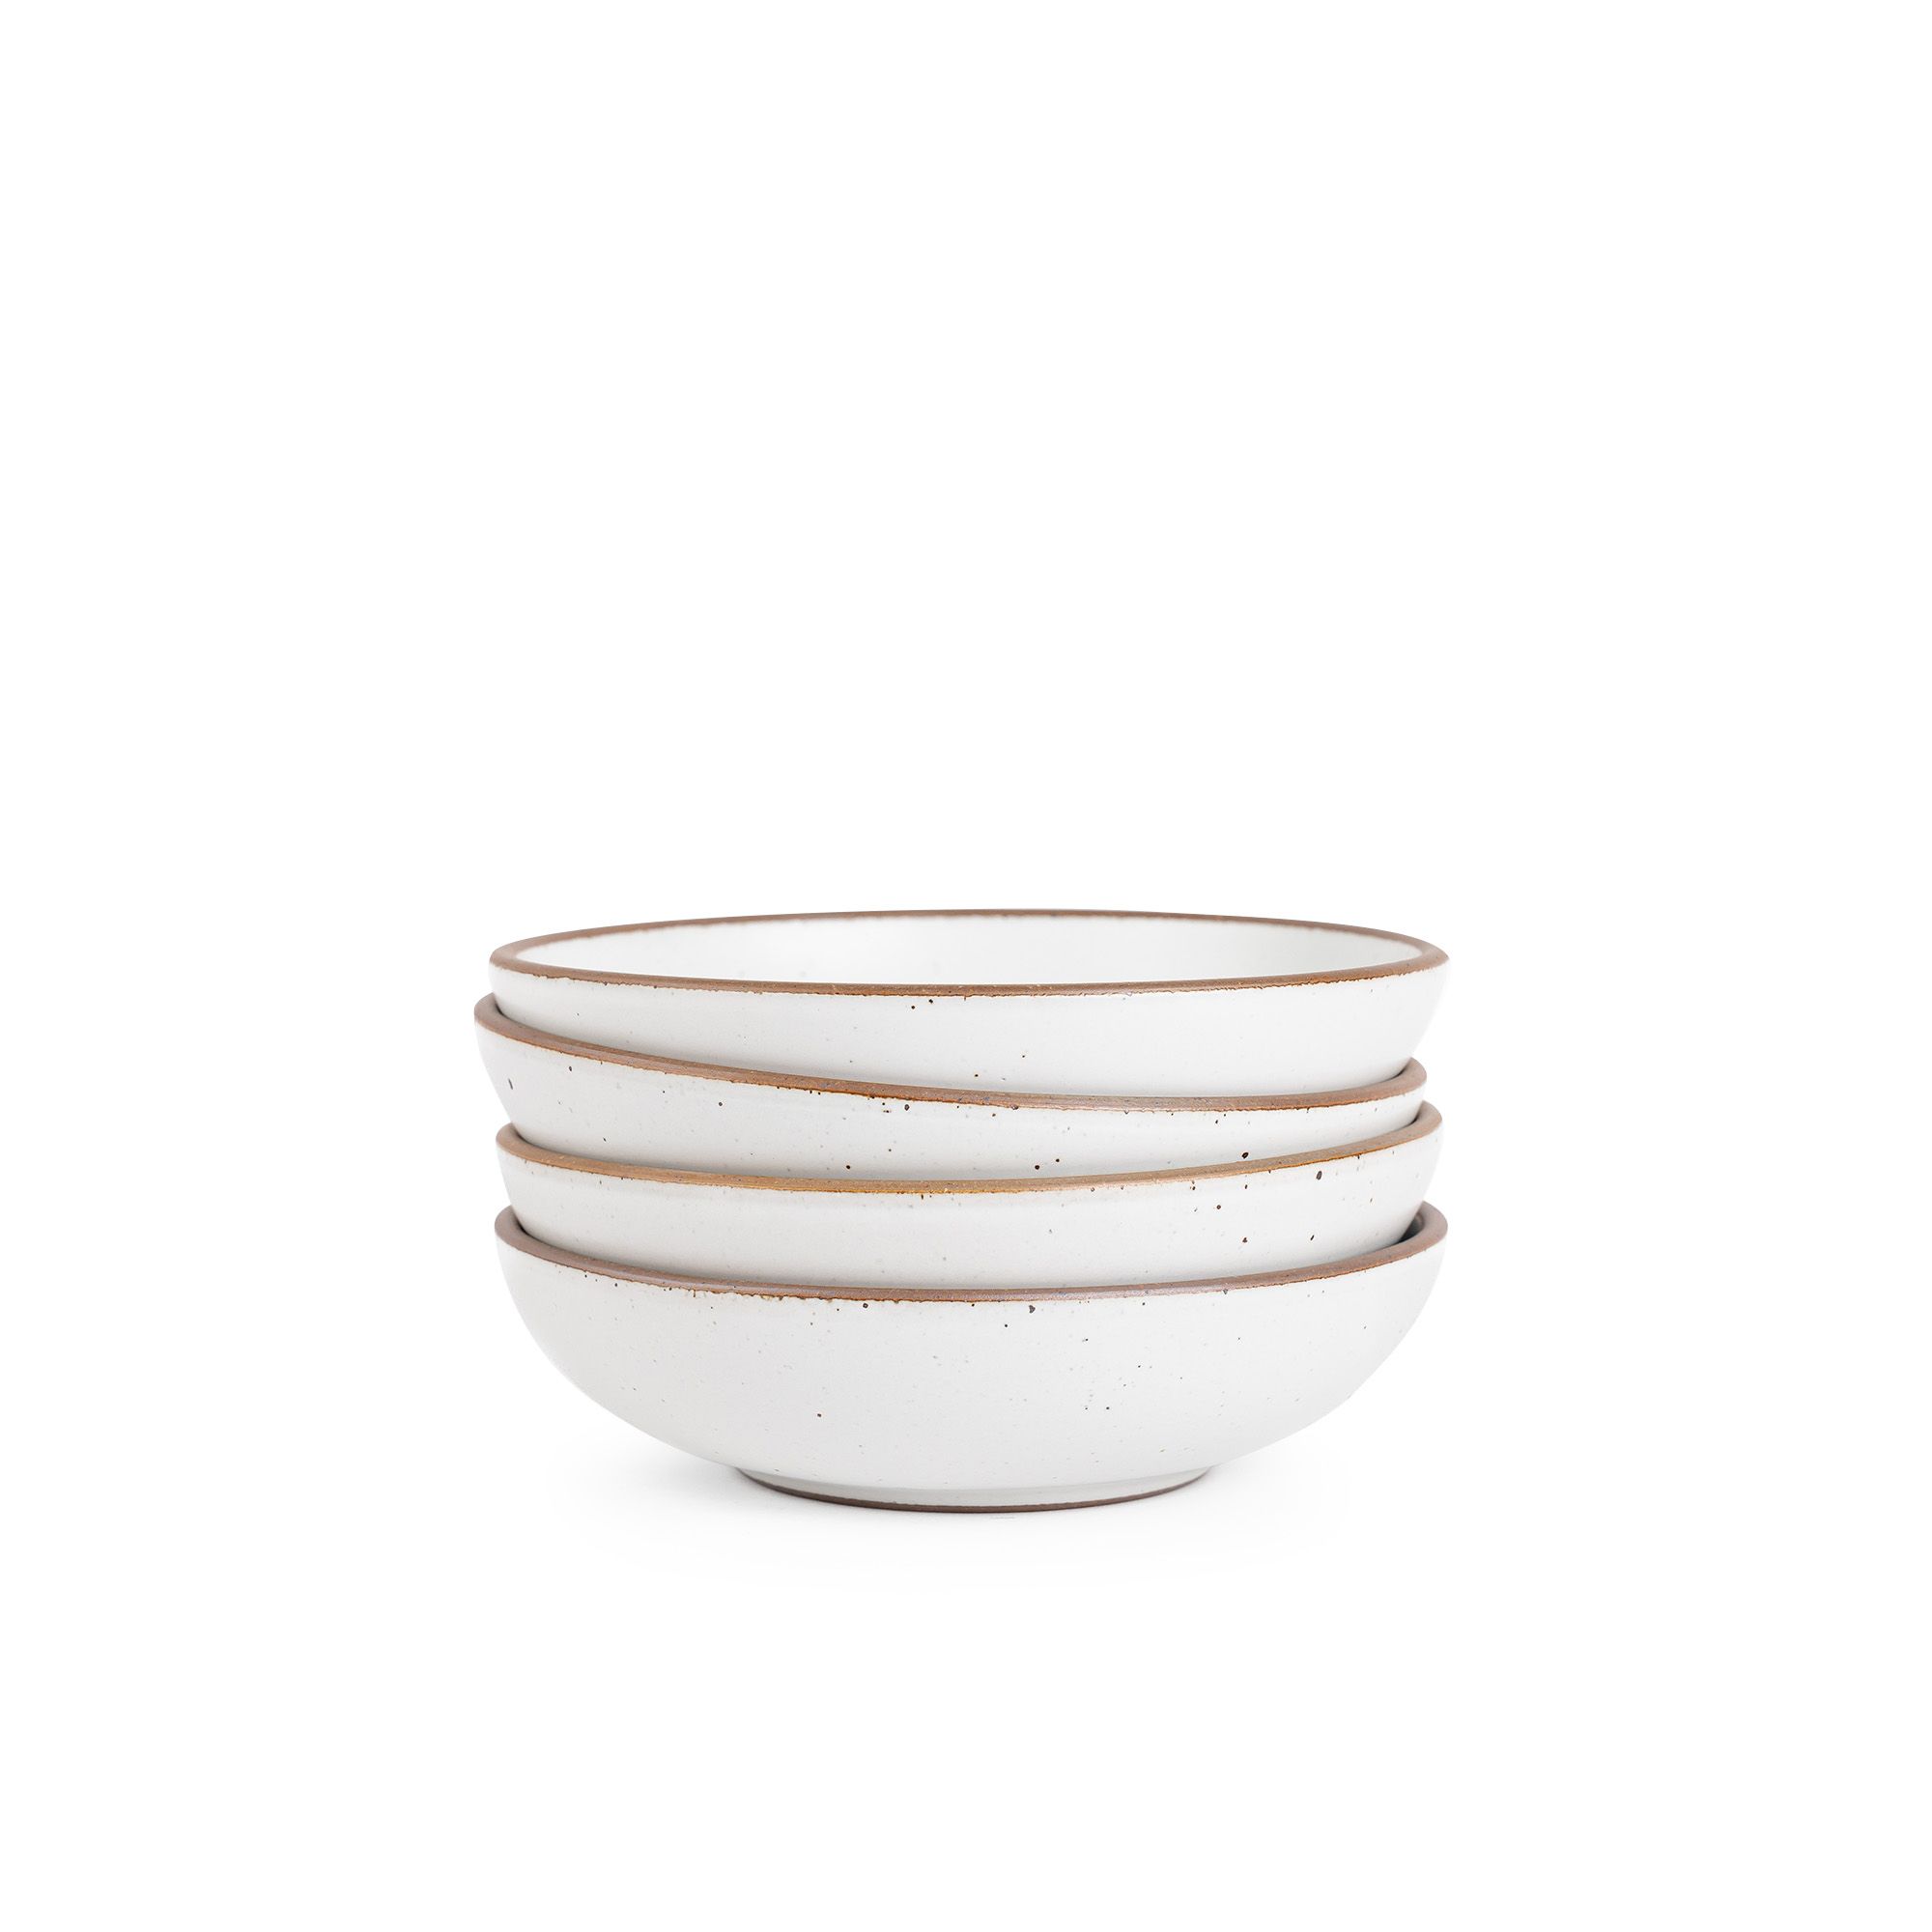 A stack of 4 dinner-sized shallow ceramic bowls in a cool white color featuring iron speckles and an unglazed rim